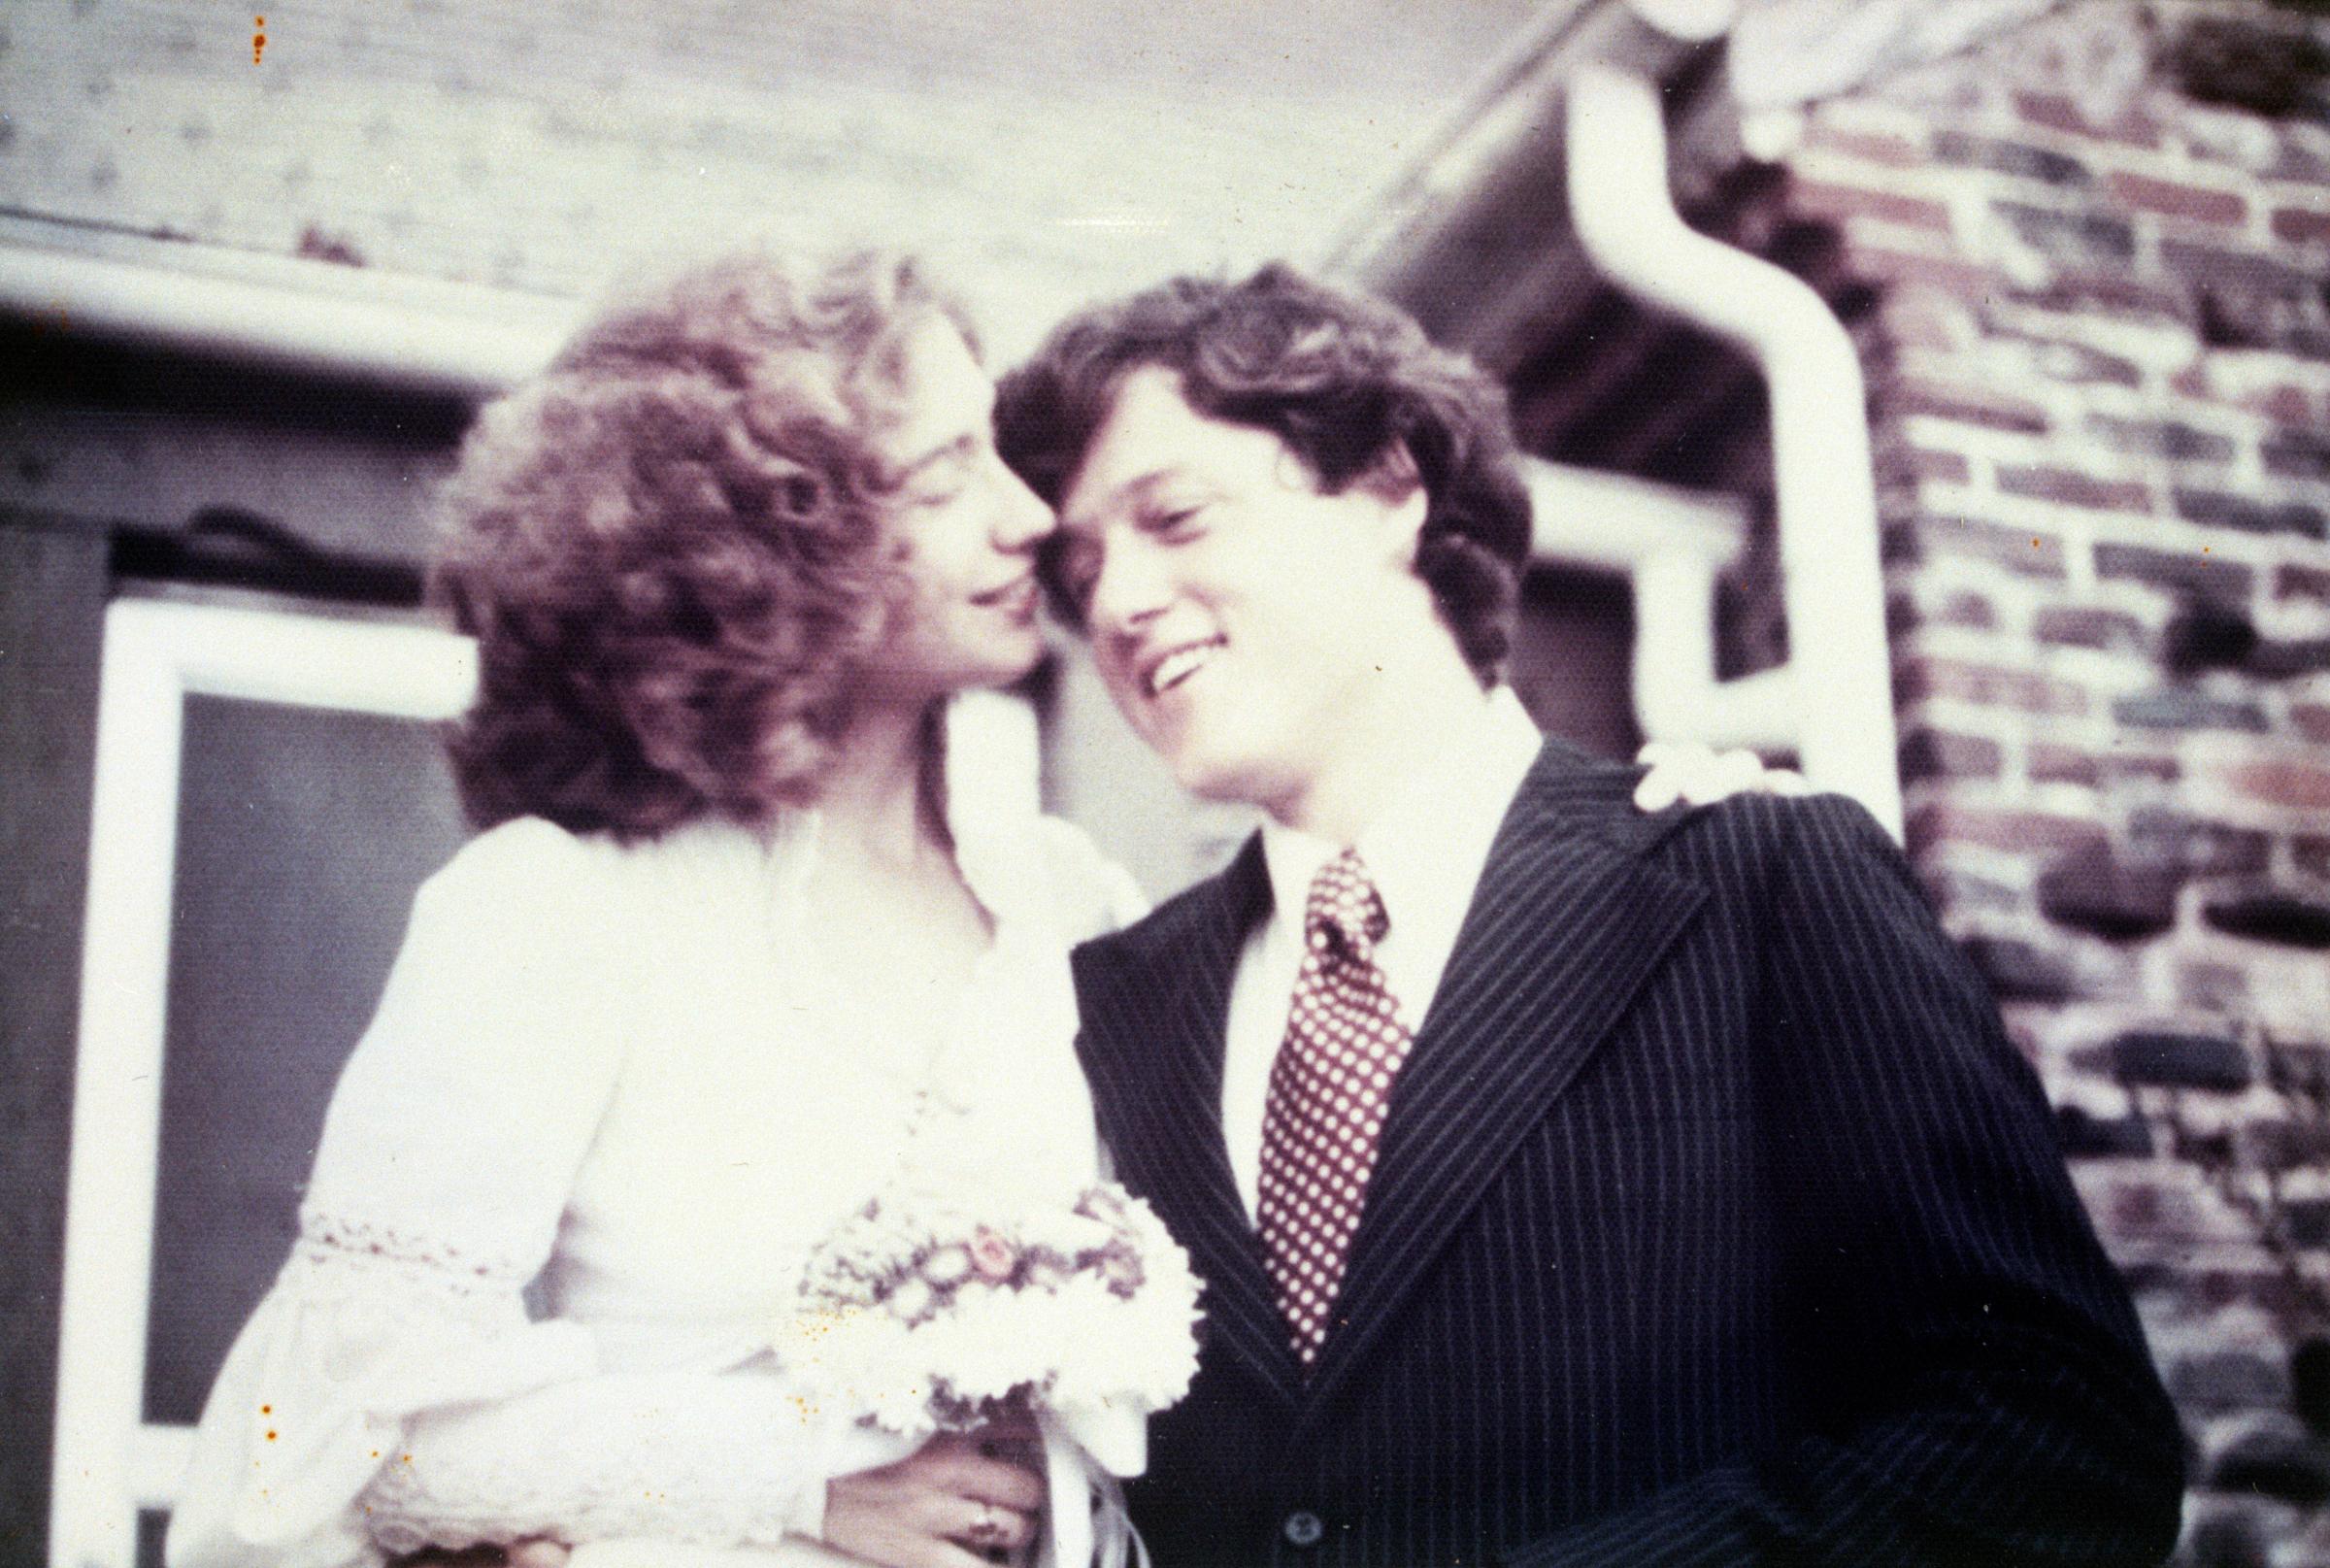 Hillary and Bill Clinton have been married 40 years— much of it spent in the political spotlight. Here, Hillary Rodham and Bill Clinton married at a small ceremony on Oct. 11, 1975 - present Courtesy William J. Clinton Presidential Library